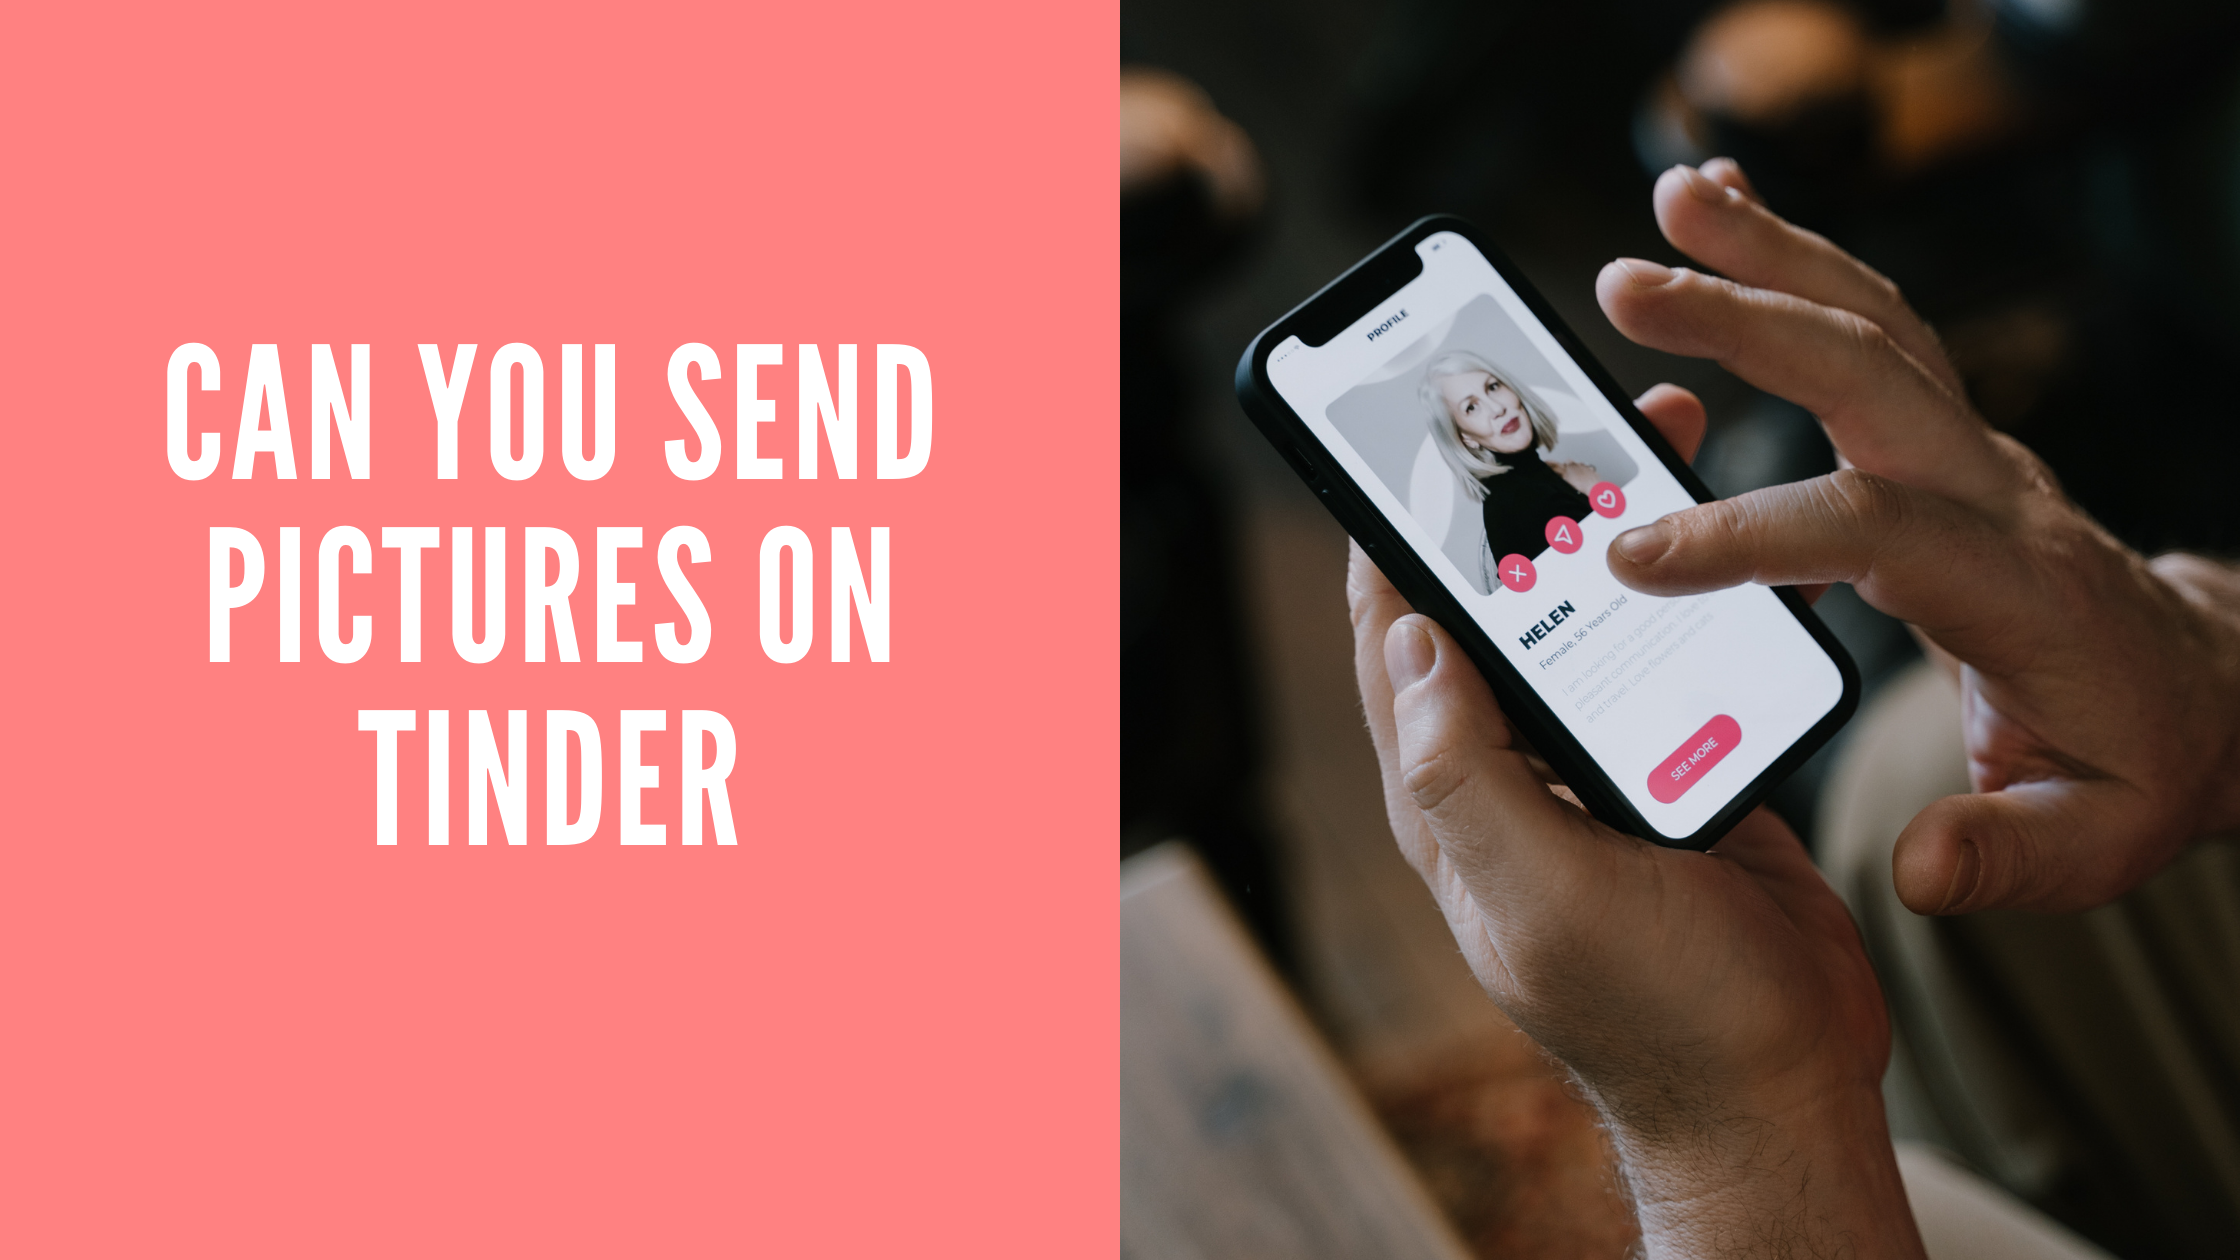 Can You Send Pictures On Tinder?